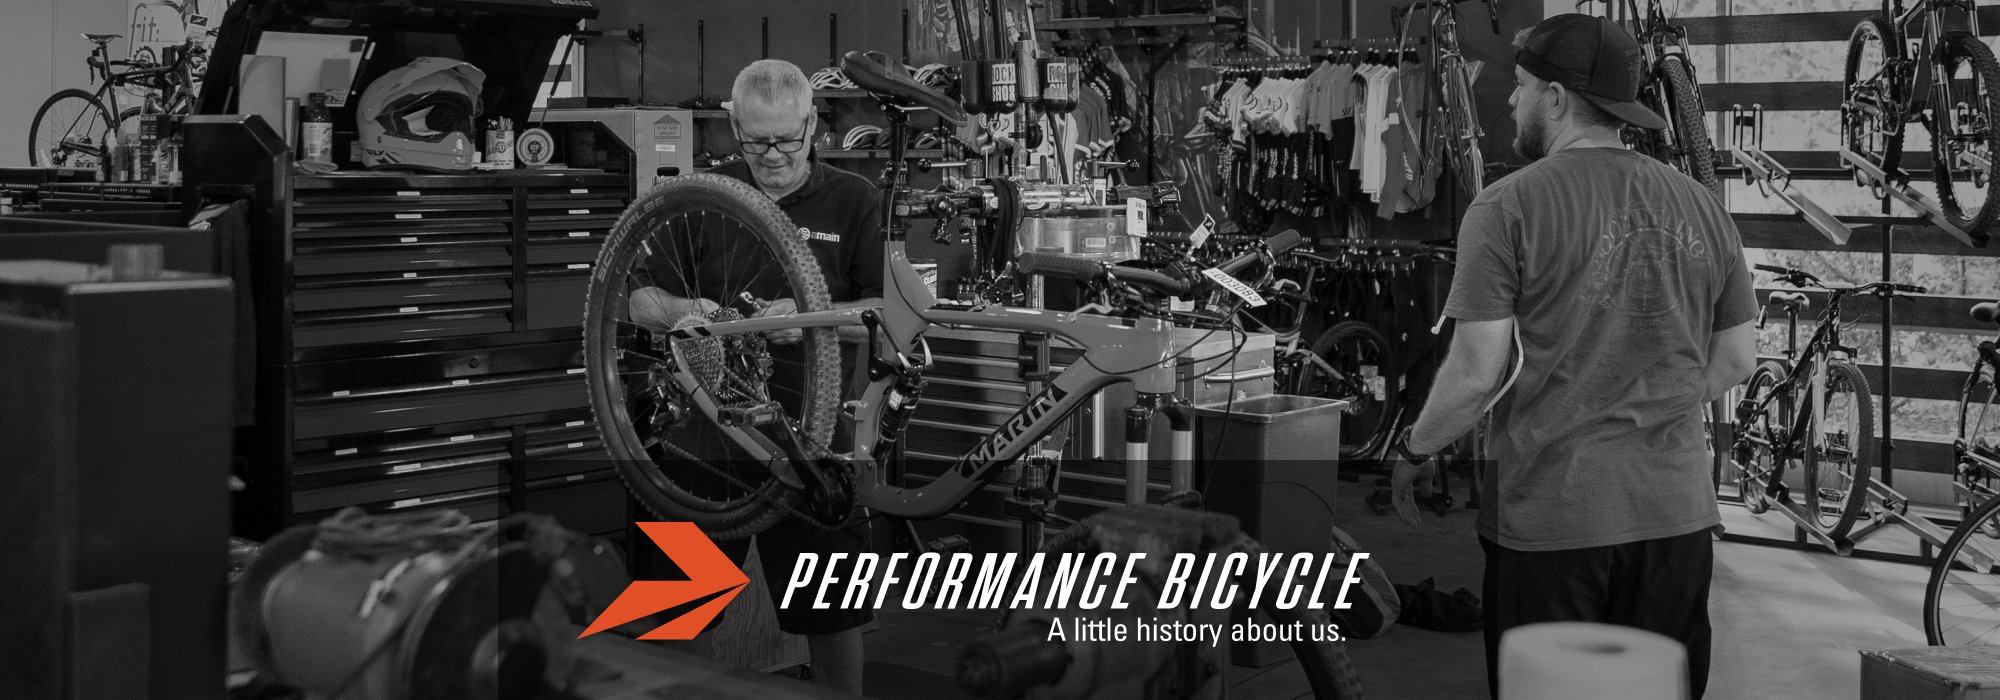 A Little History About Performance Bicycle